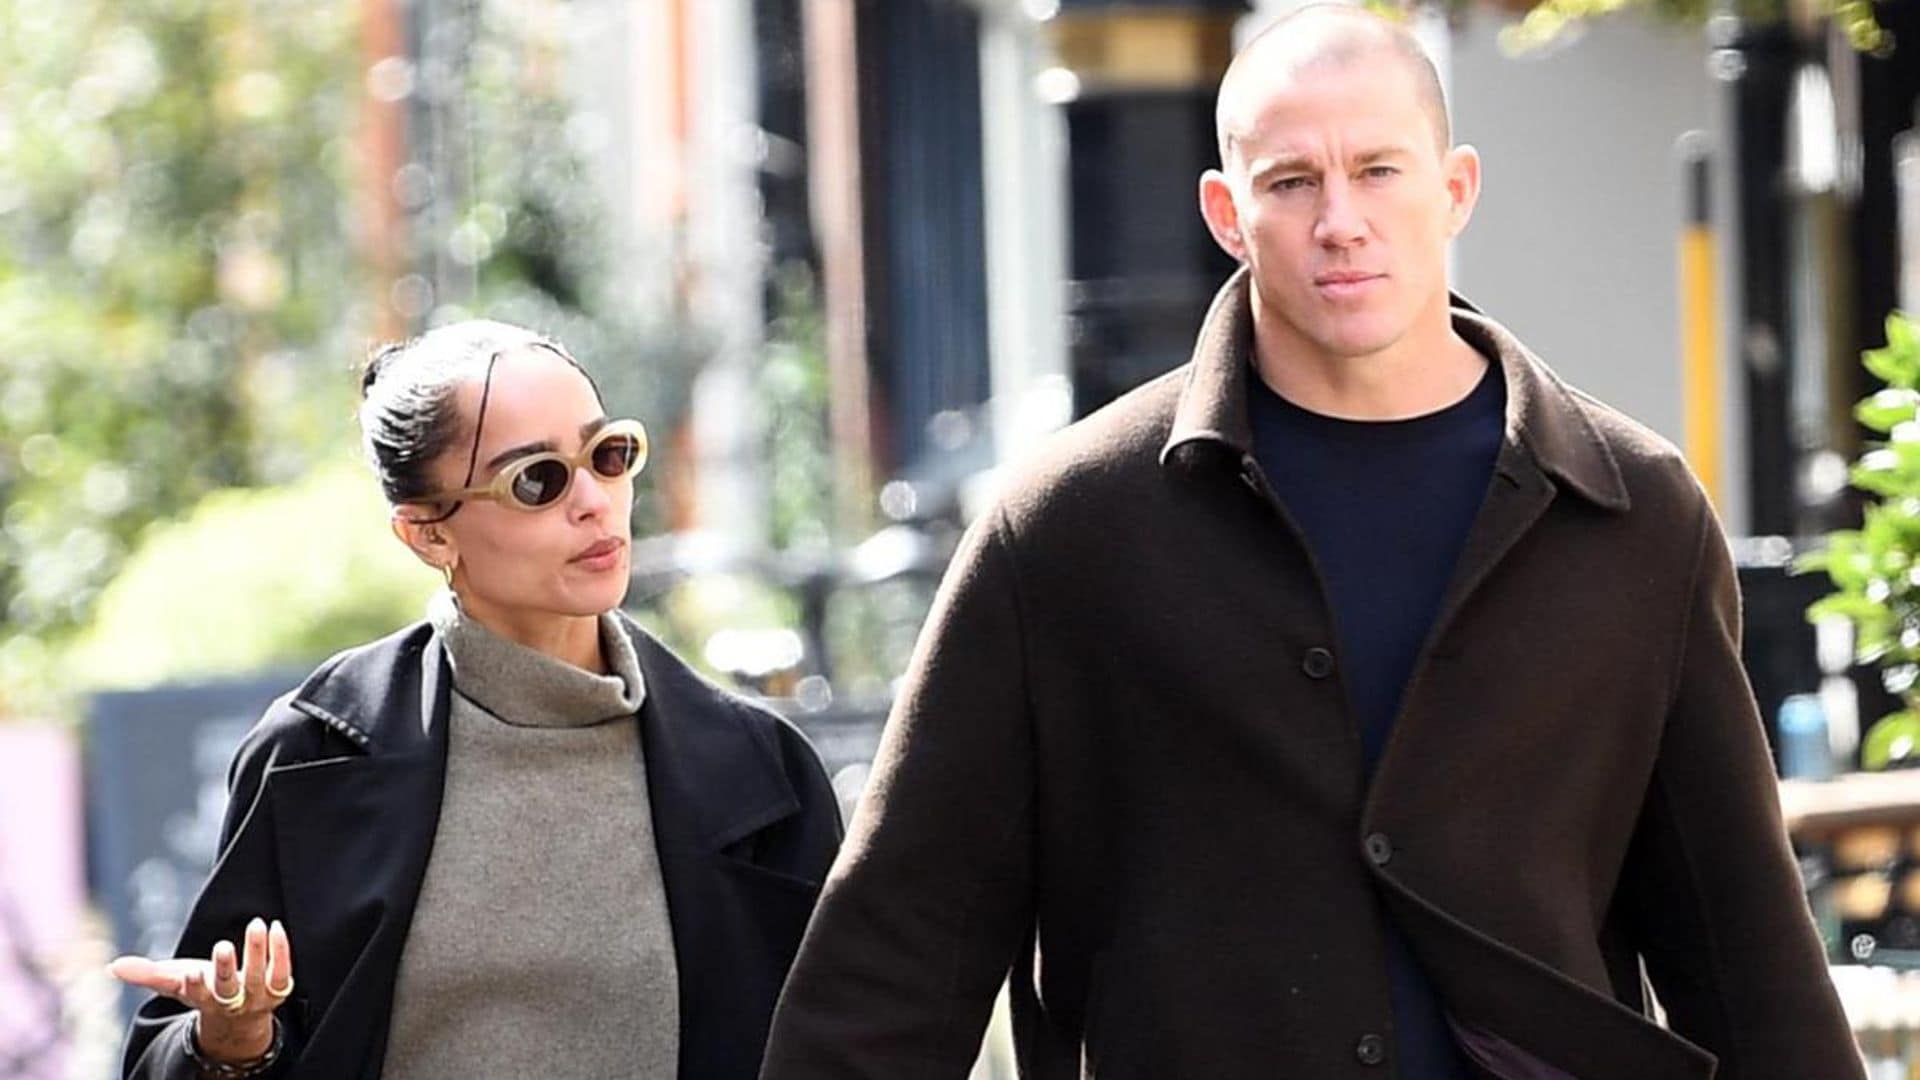 Zoë Kravitz and Channing Tatum give rare insight into their relationship